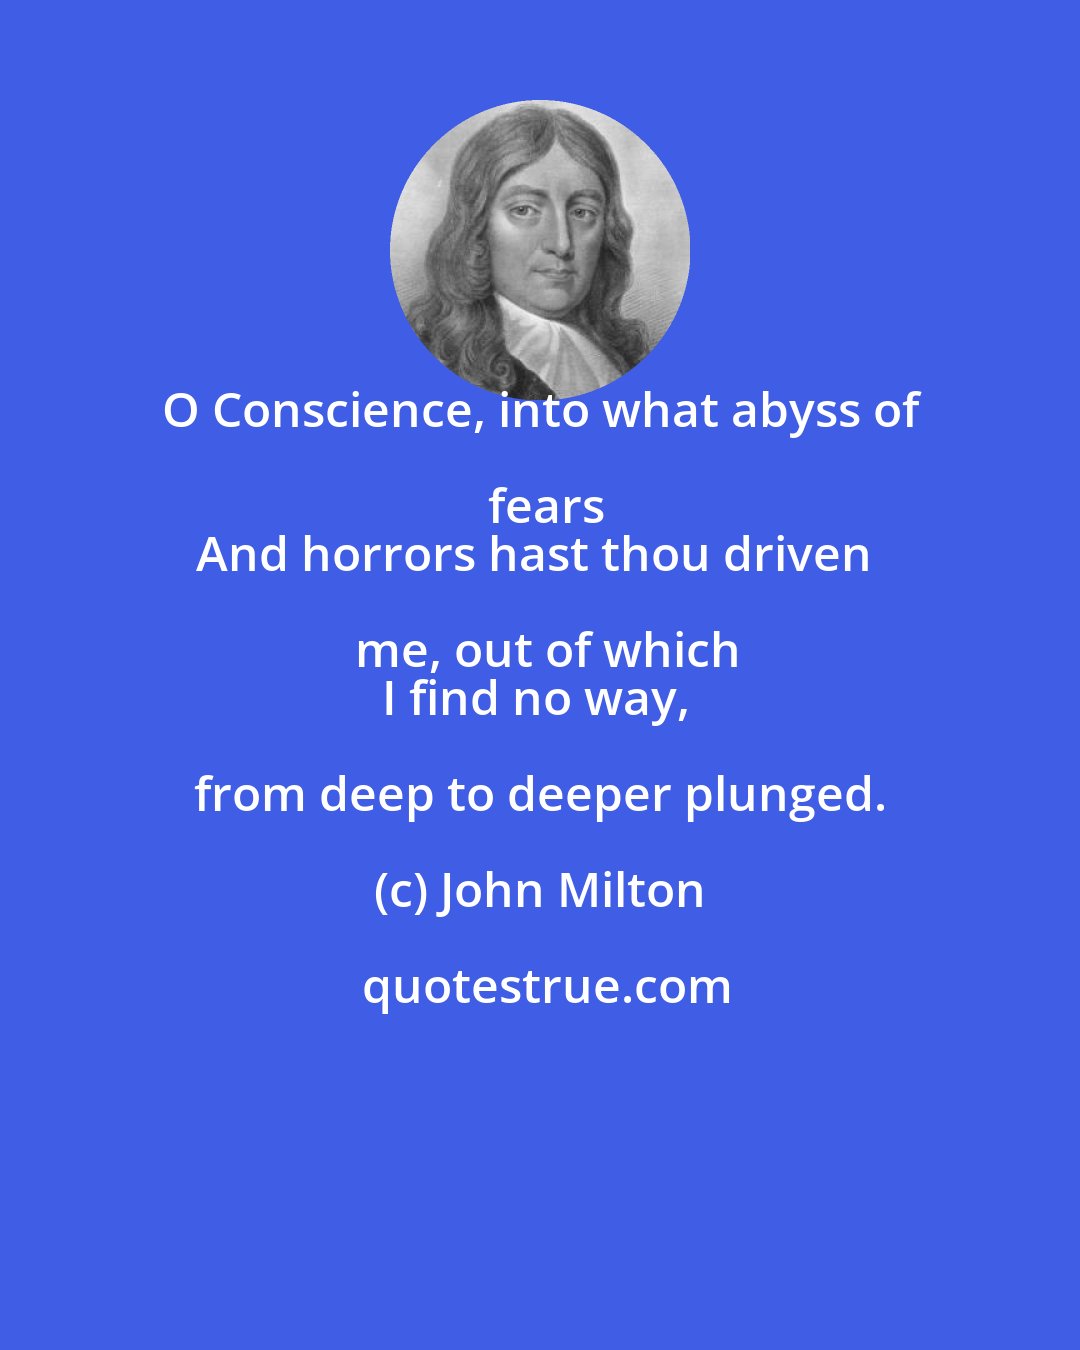 John Milton: O Conscience, into what abyss of fears
And horrors hast thou driven me, out of which
I find no way, from deep to deeper plunged.